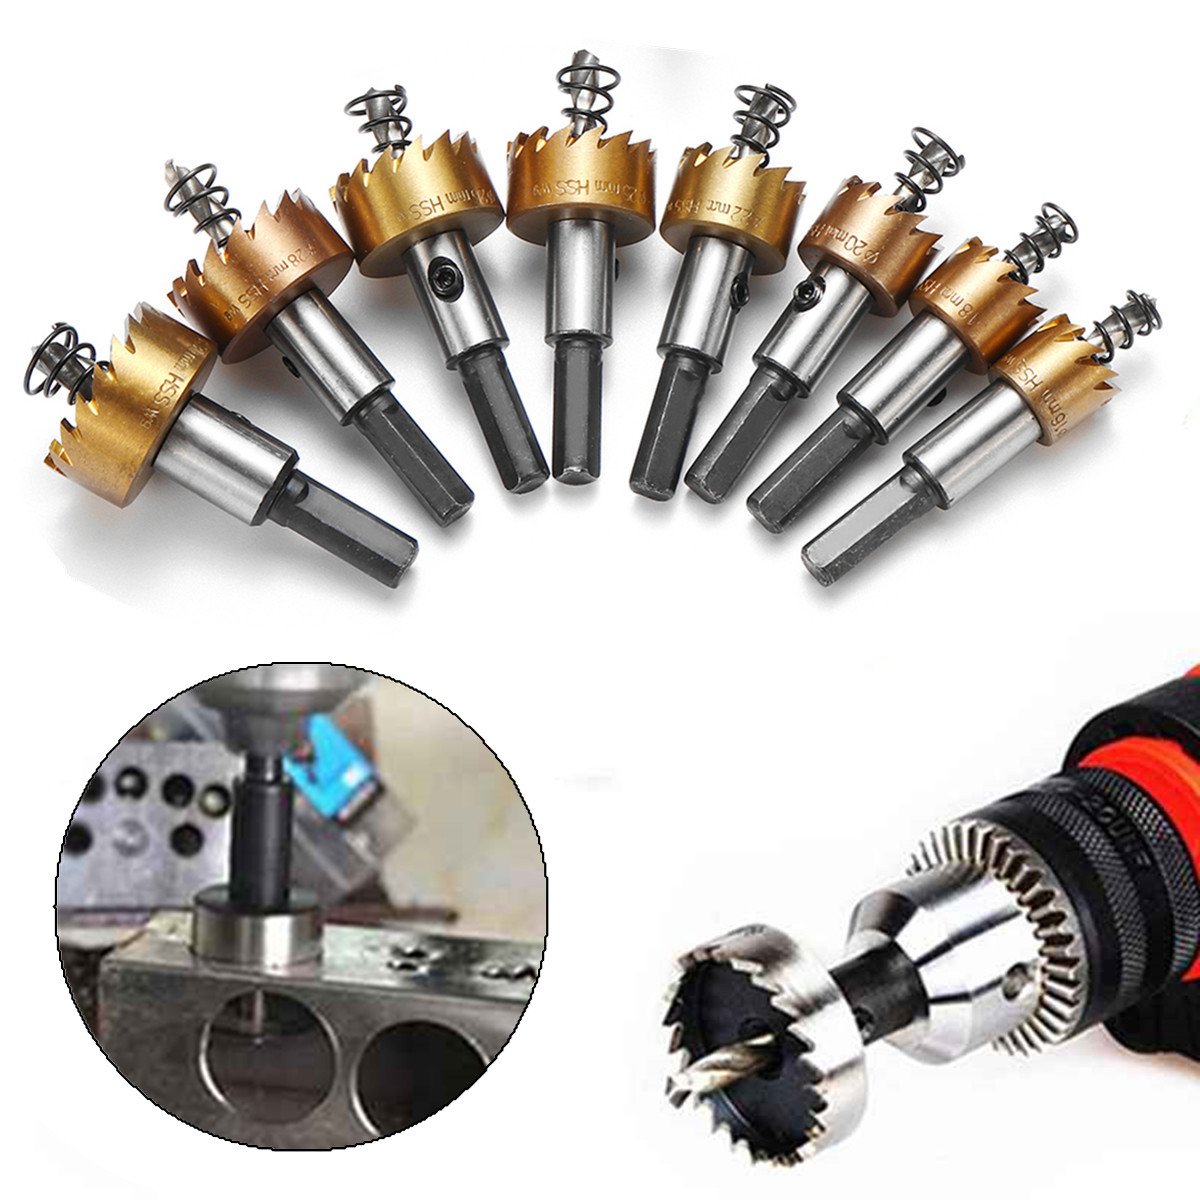 

15-50mm Hole Saw Drill Bit HSS Titanium Coated Hole Saw Cutter for Metal Wood Alloy